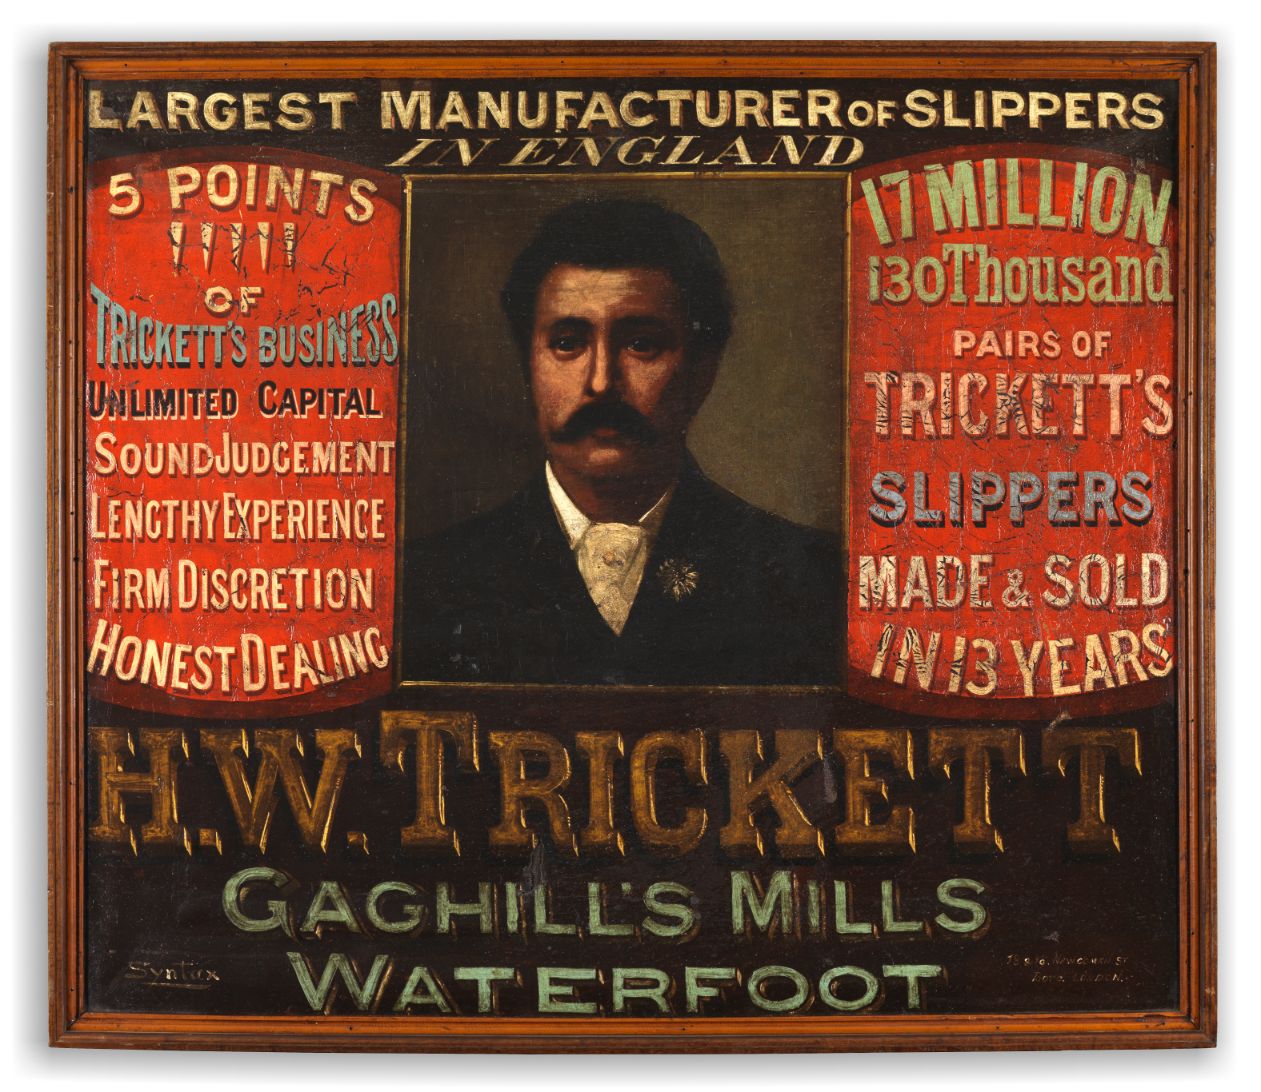 Remarkable Shoemaker's Trade Sign for "H W Trickett"